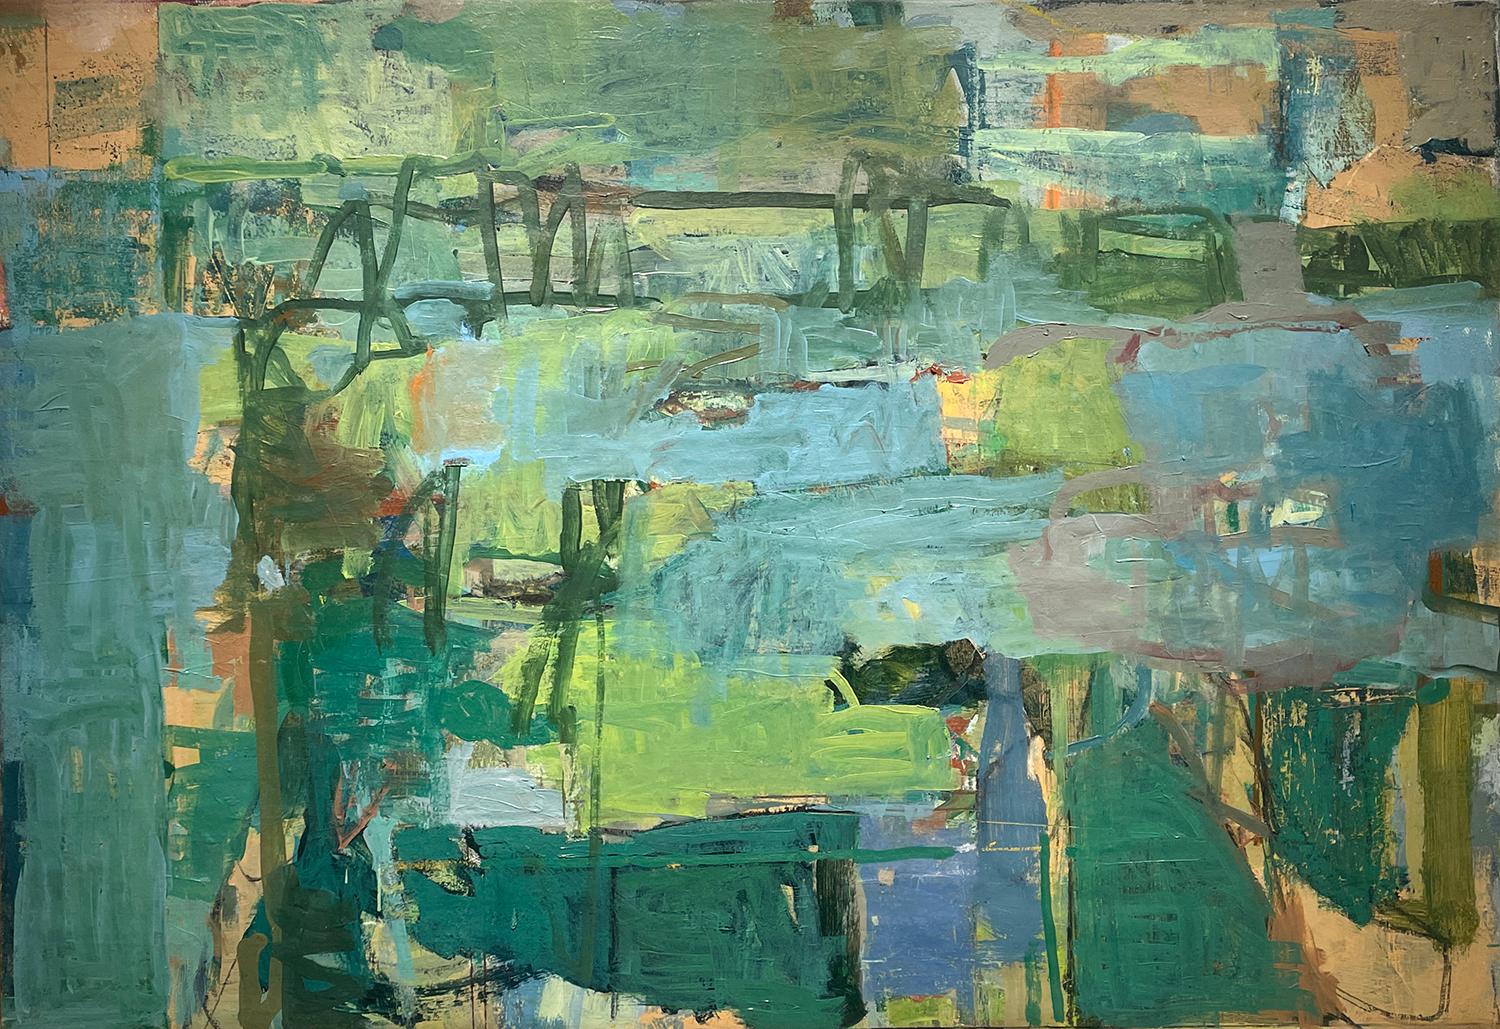 Bridge, 2024
oil on canvas
27.5 x 39.5 inches with a natural maple floater frame

Predominantly painted in blue and green, this abstract work by James O'Shea is vivacious while delicately balanced. O'Shea's highly energetic gestures and scribbles